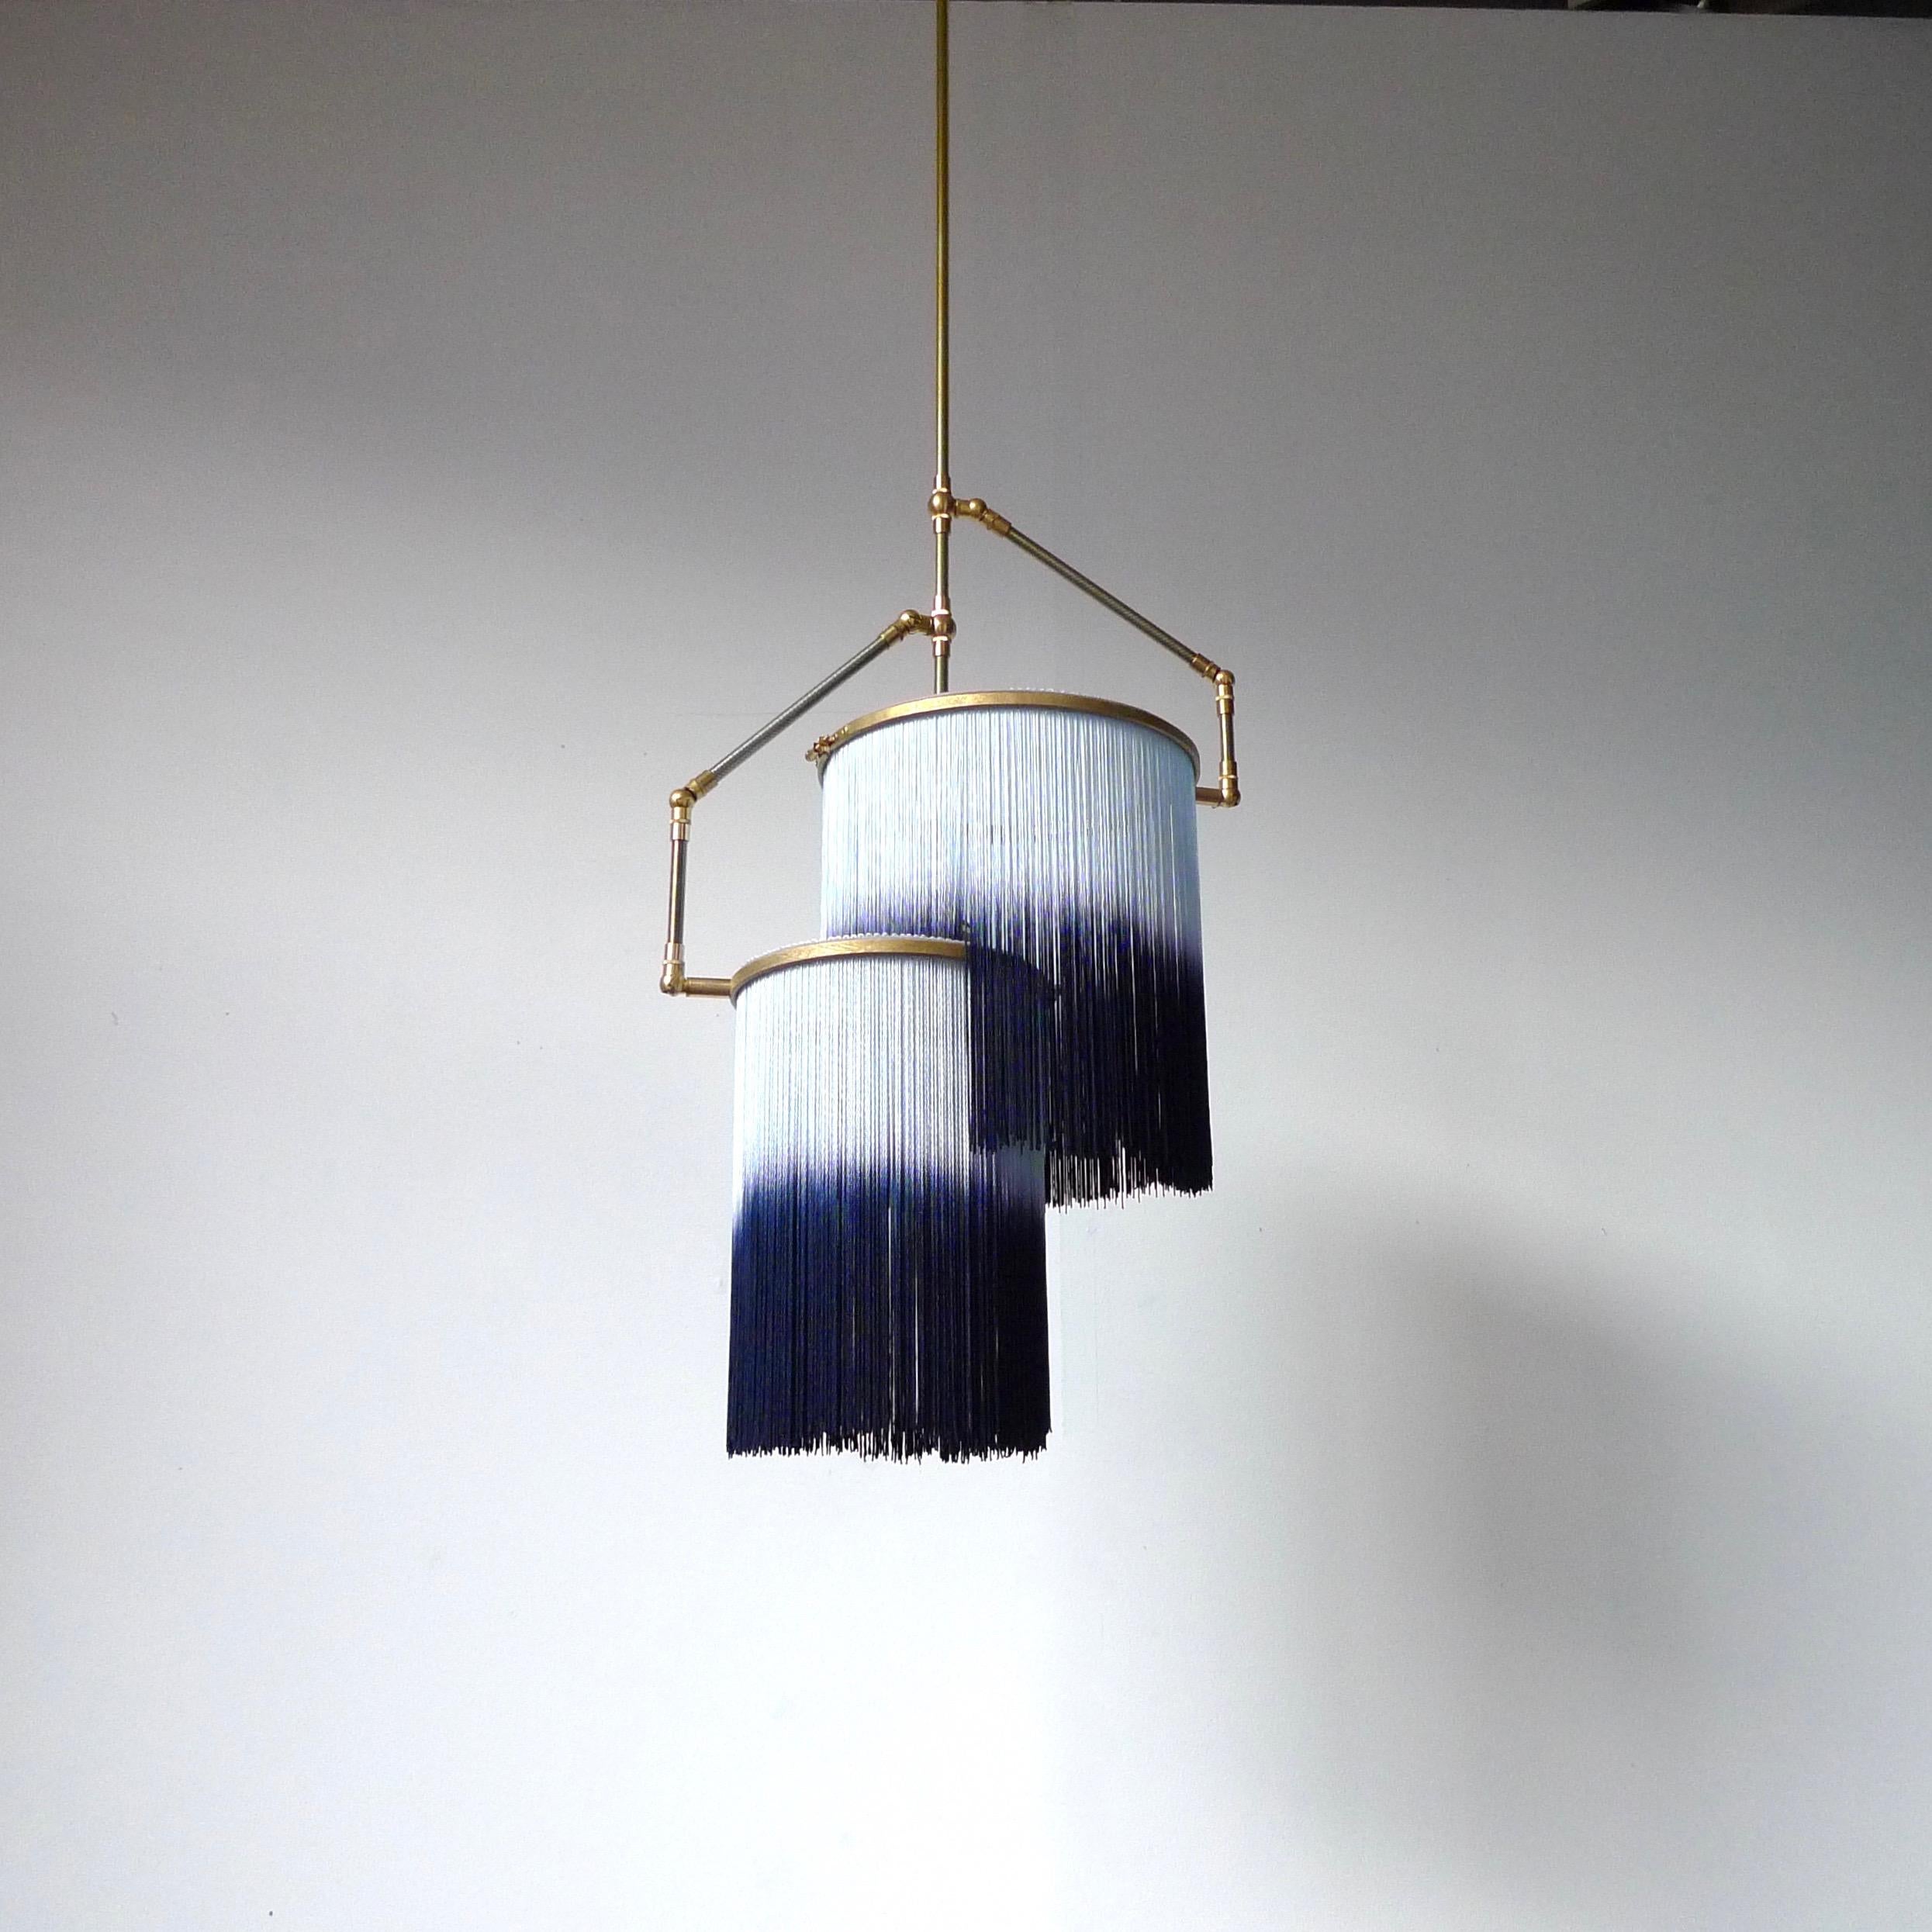 Blue Charme pendant lamp, Sander Bottinga

Dimensions: H 65 (can be customized) x W 38 x D 25 cm
Hand-Sculpted in brass, leather, wood and dip dyed colored Fringes in viscose.
The movable arms makes it possible to move the circles with fringes